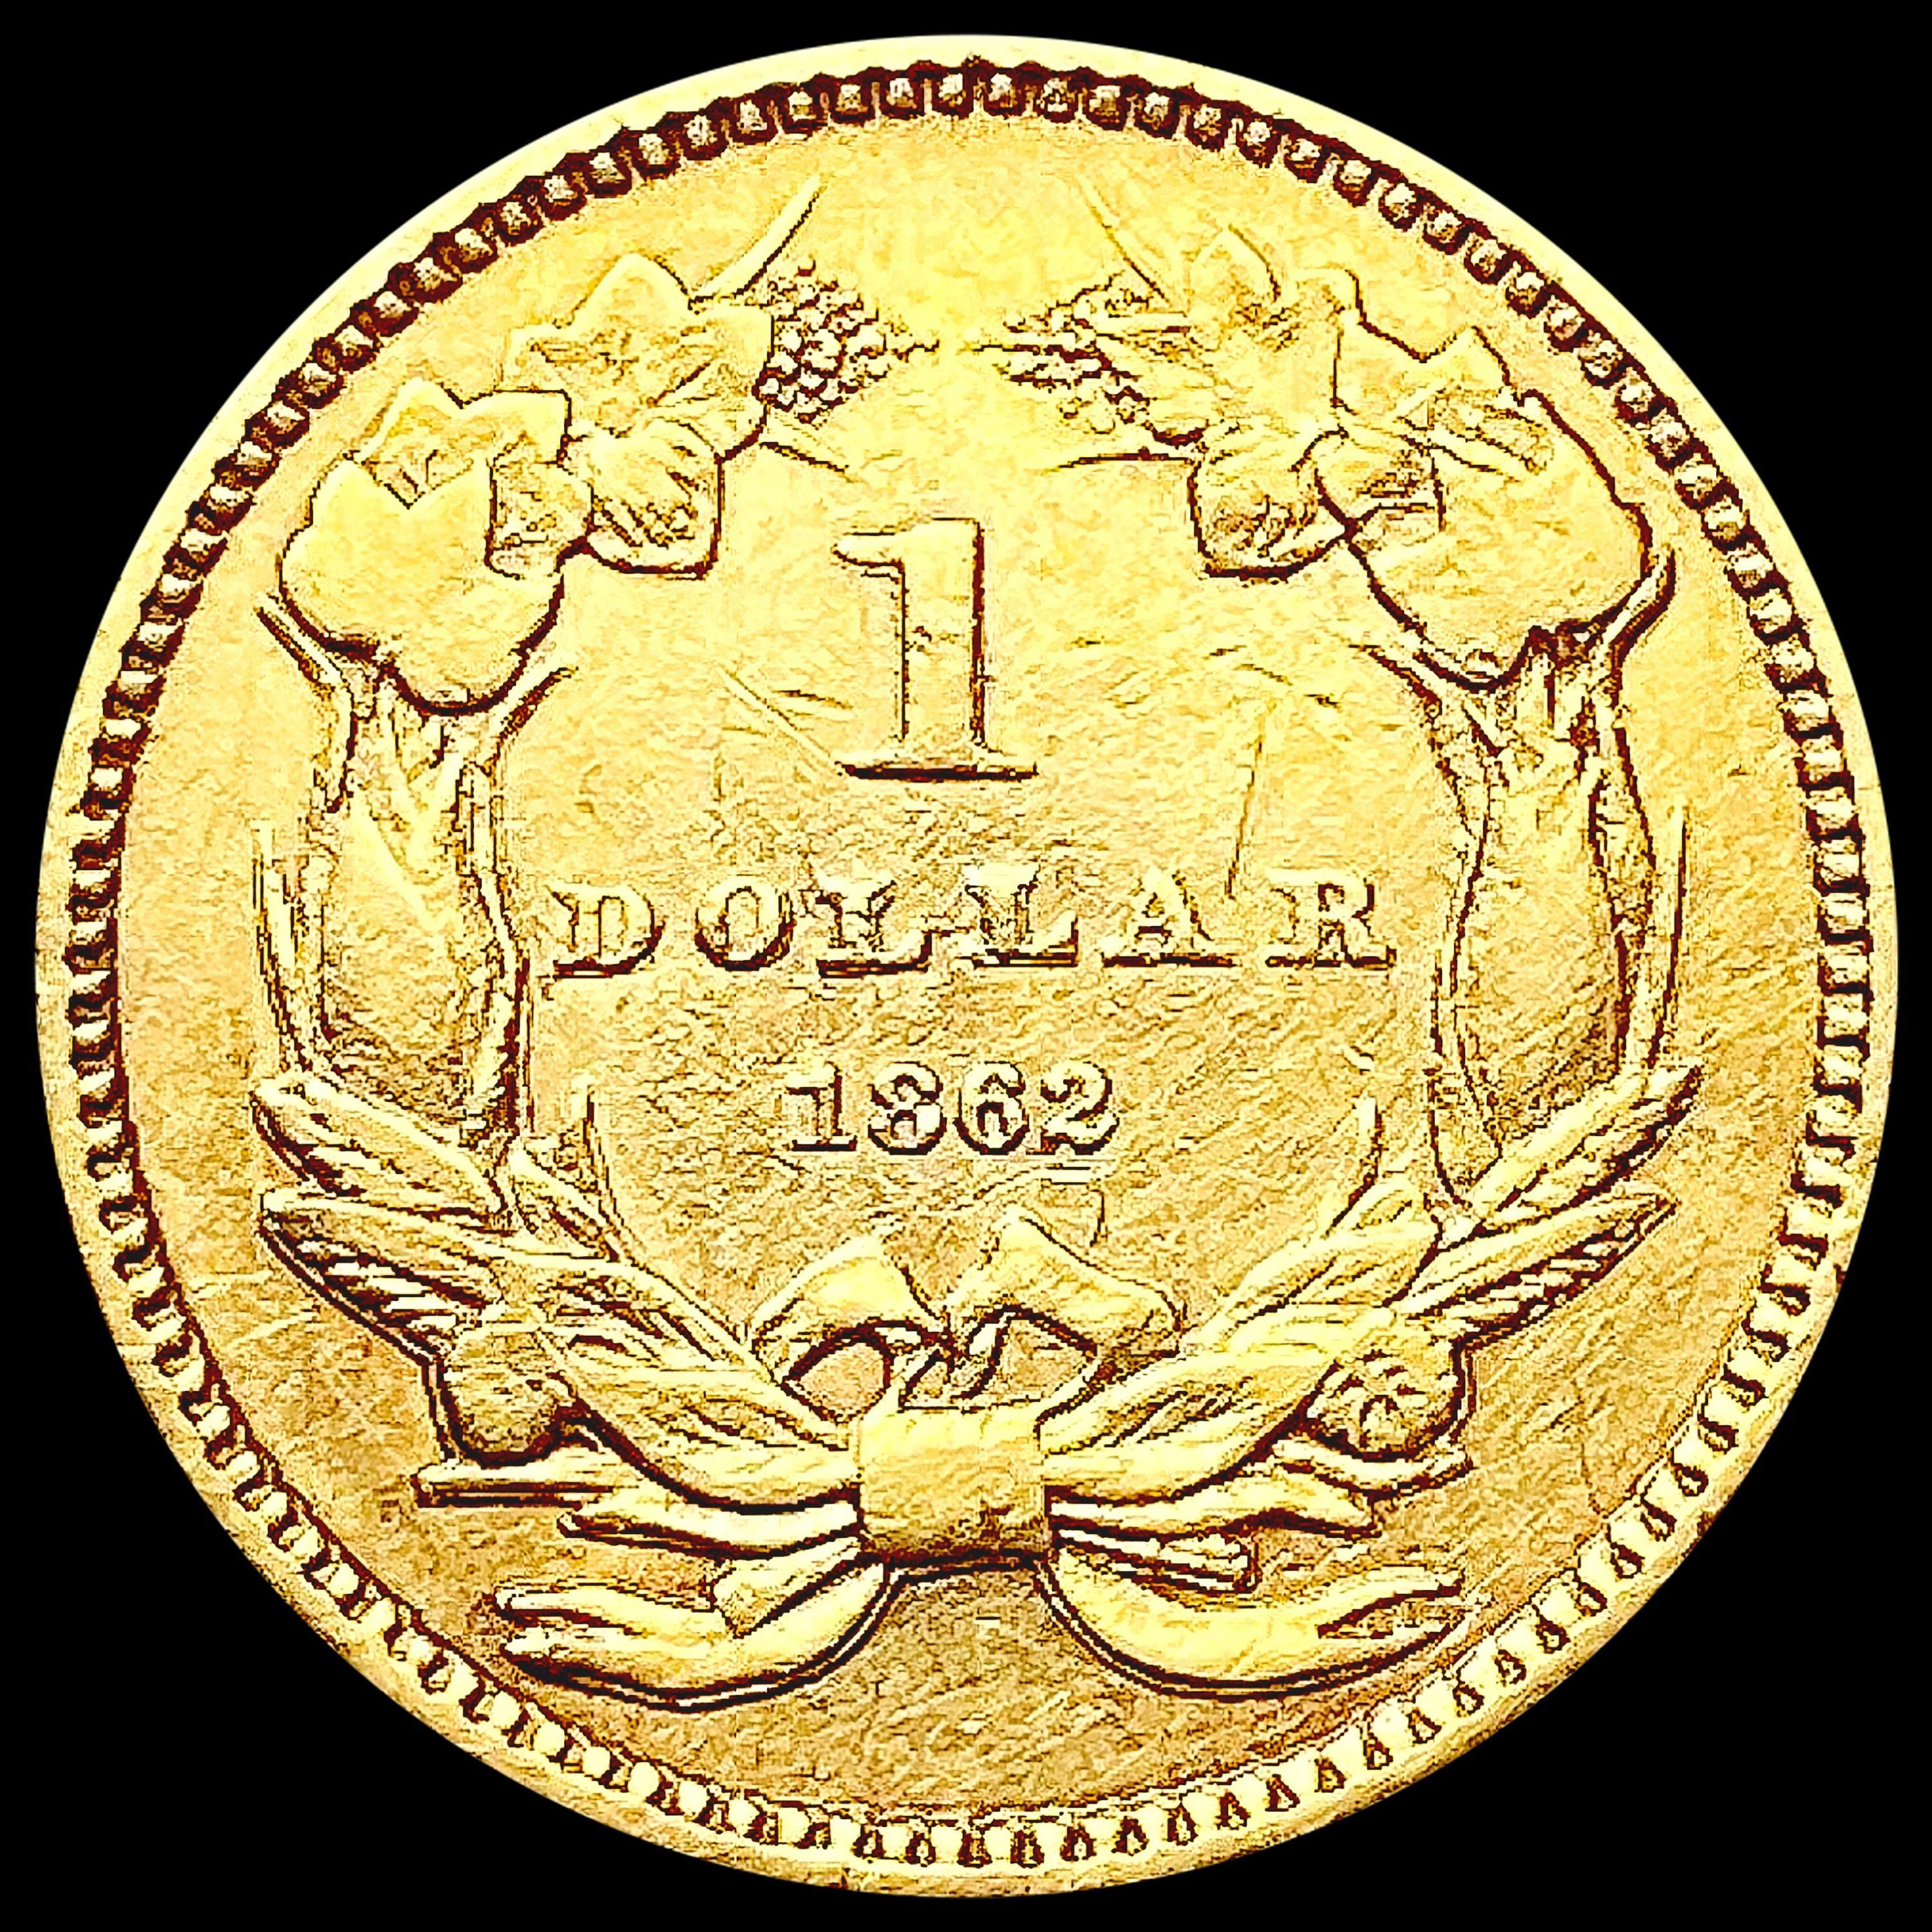 8162 Rare Gold Dollar CLOSELY UNCIRCULATED